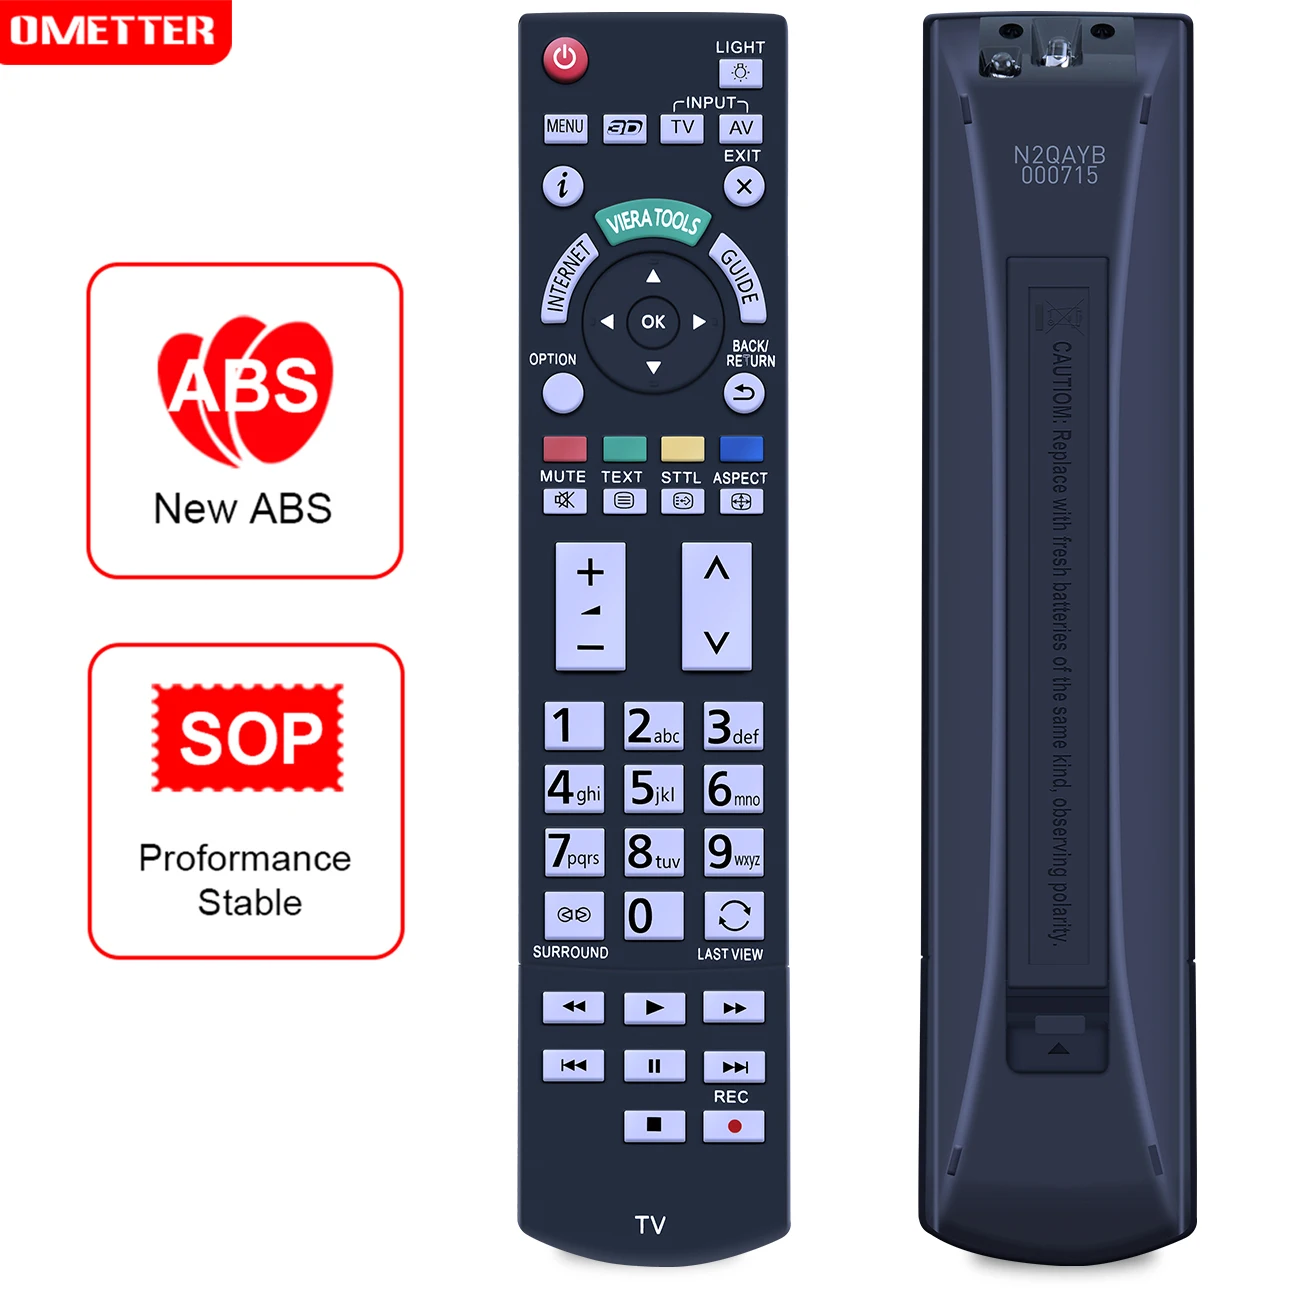 

New Replacement Remote Control for Panasonic N2QAYB000715 N2QAYB000430 LED 3D-dx TX-PR50GT50 TX-P50ST50E TX-L42ETW50 TX-P50VT50B